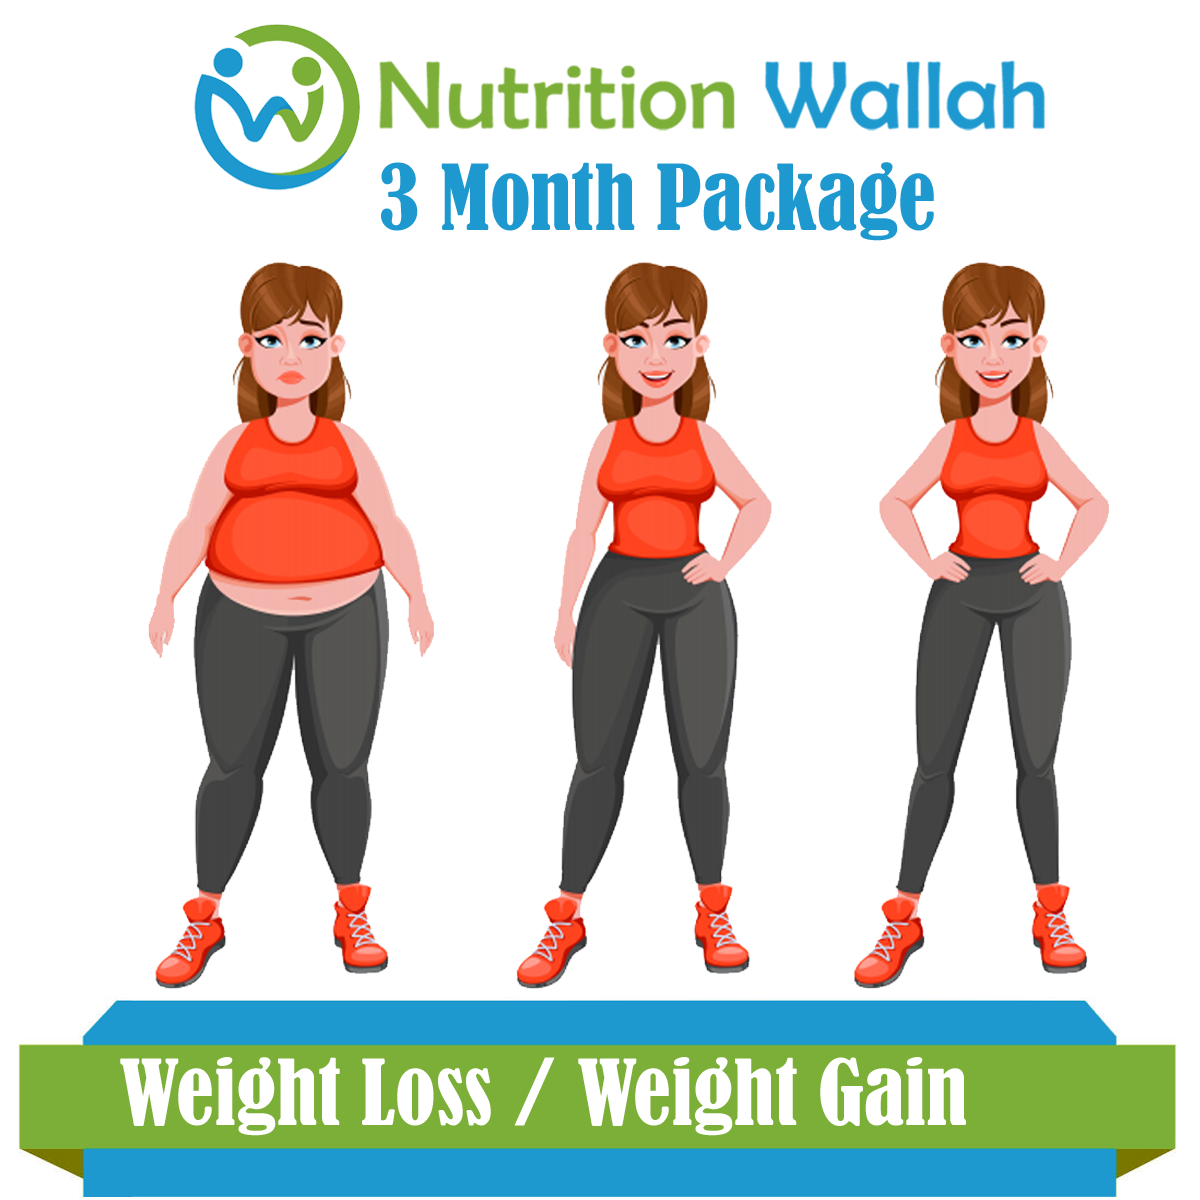 3 Month Package Weight Loss or Weight Gain
